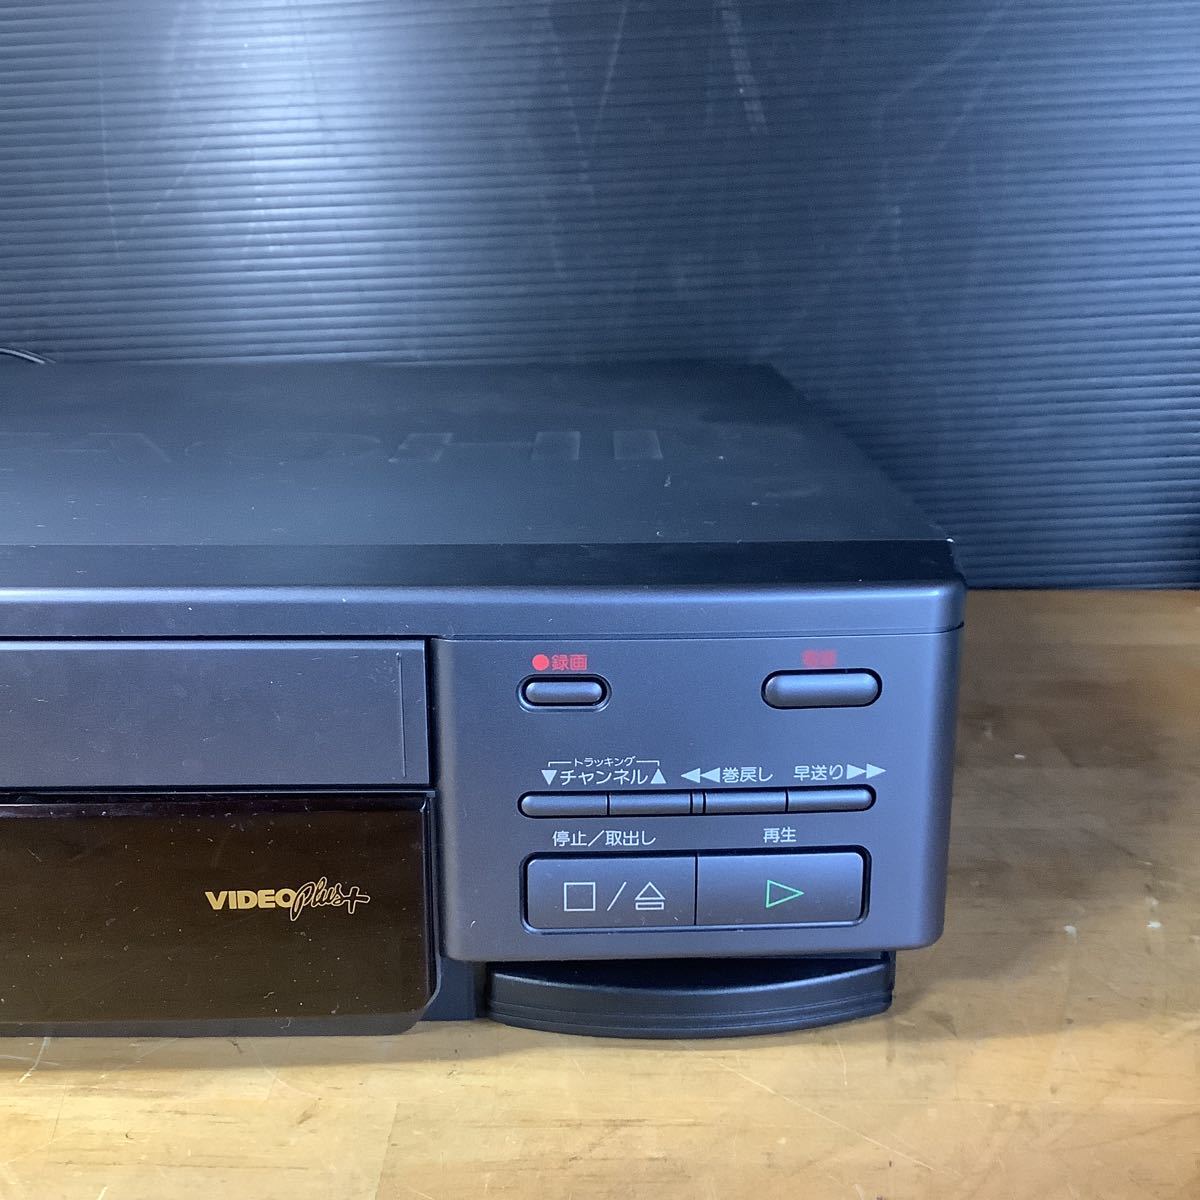 HITACHI video cassette recorder Hitachi VT-F50 94 year made MADE IN JAPAN VHS video deck used 